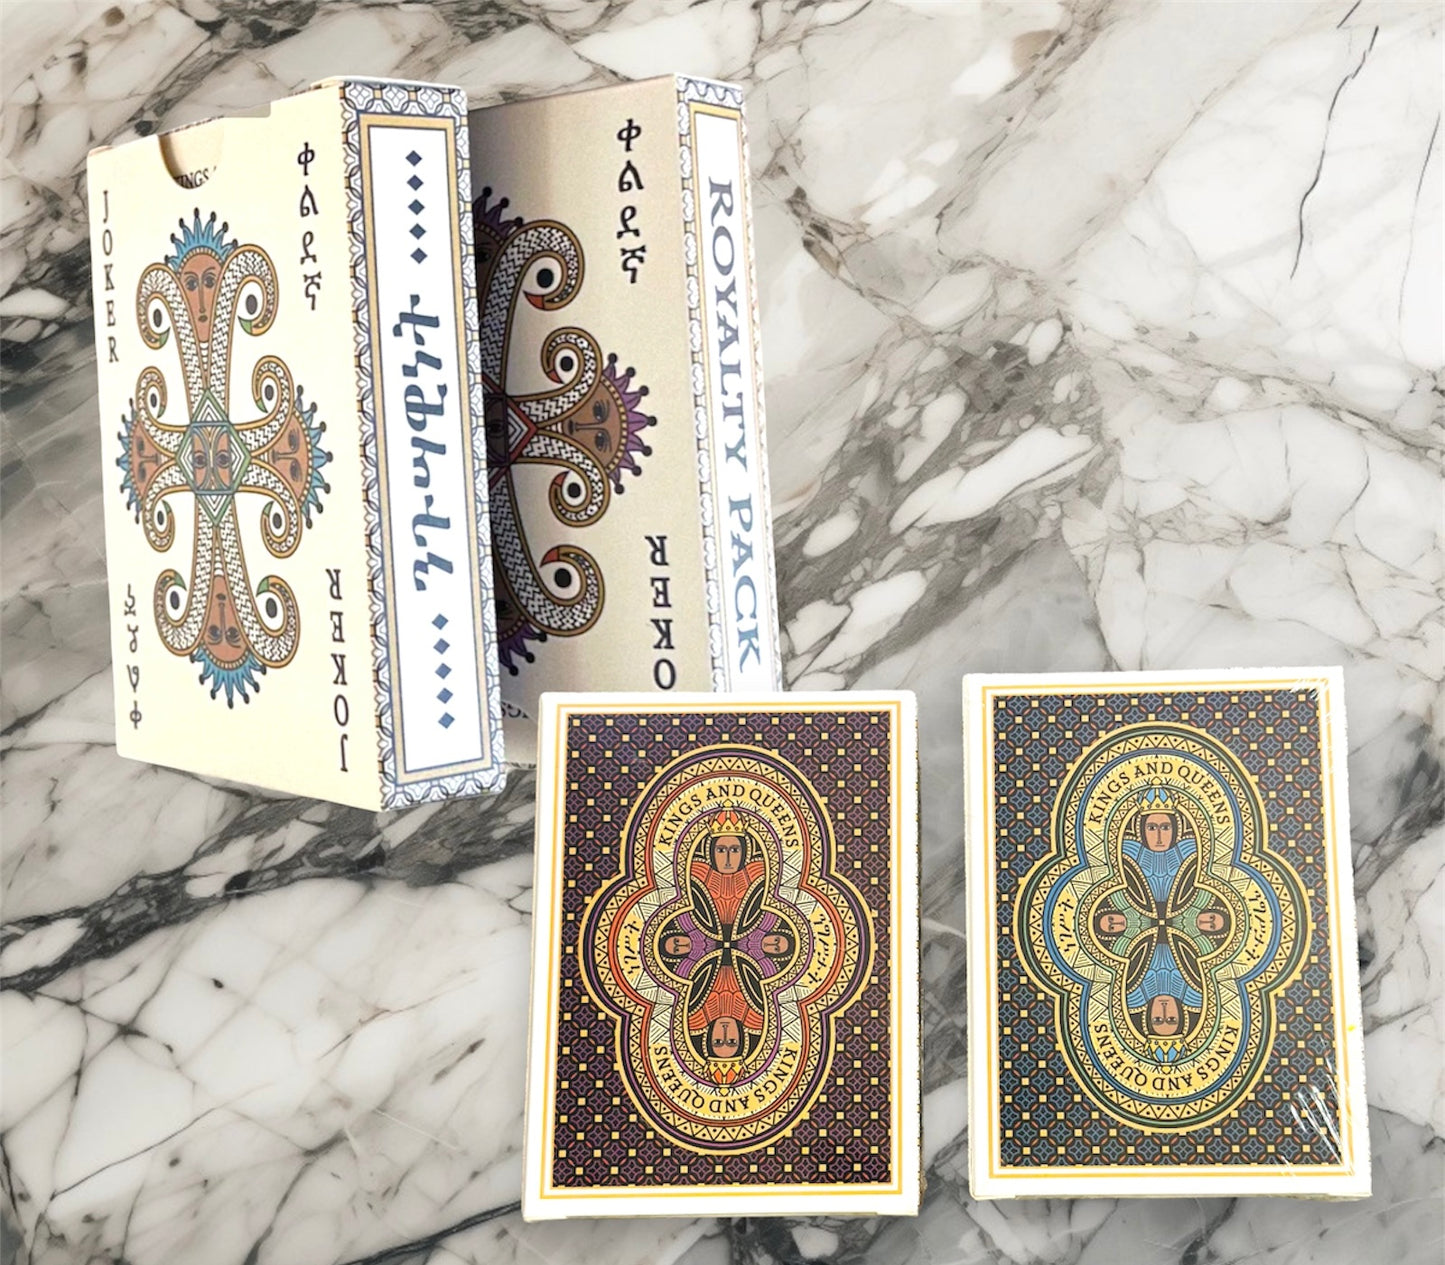 Royalty Pack Standard Playing Cards - Ethiopian Royalty Touch